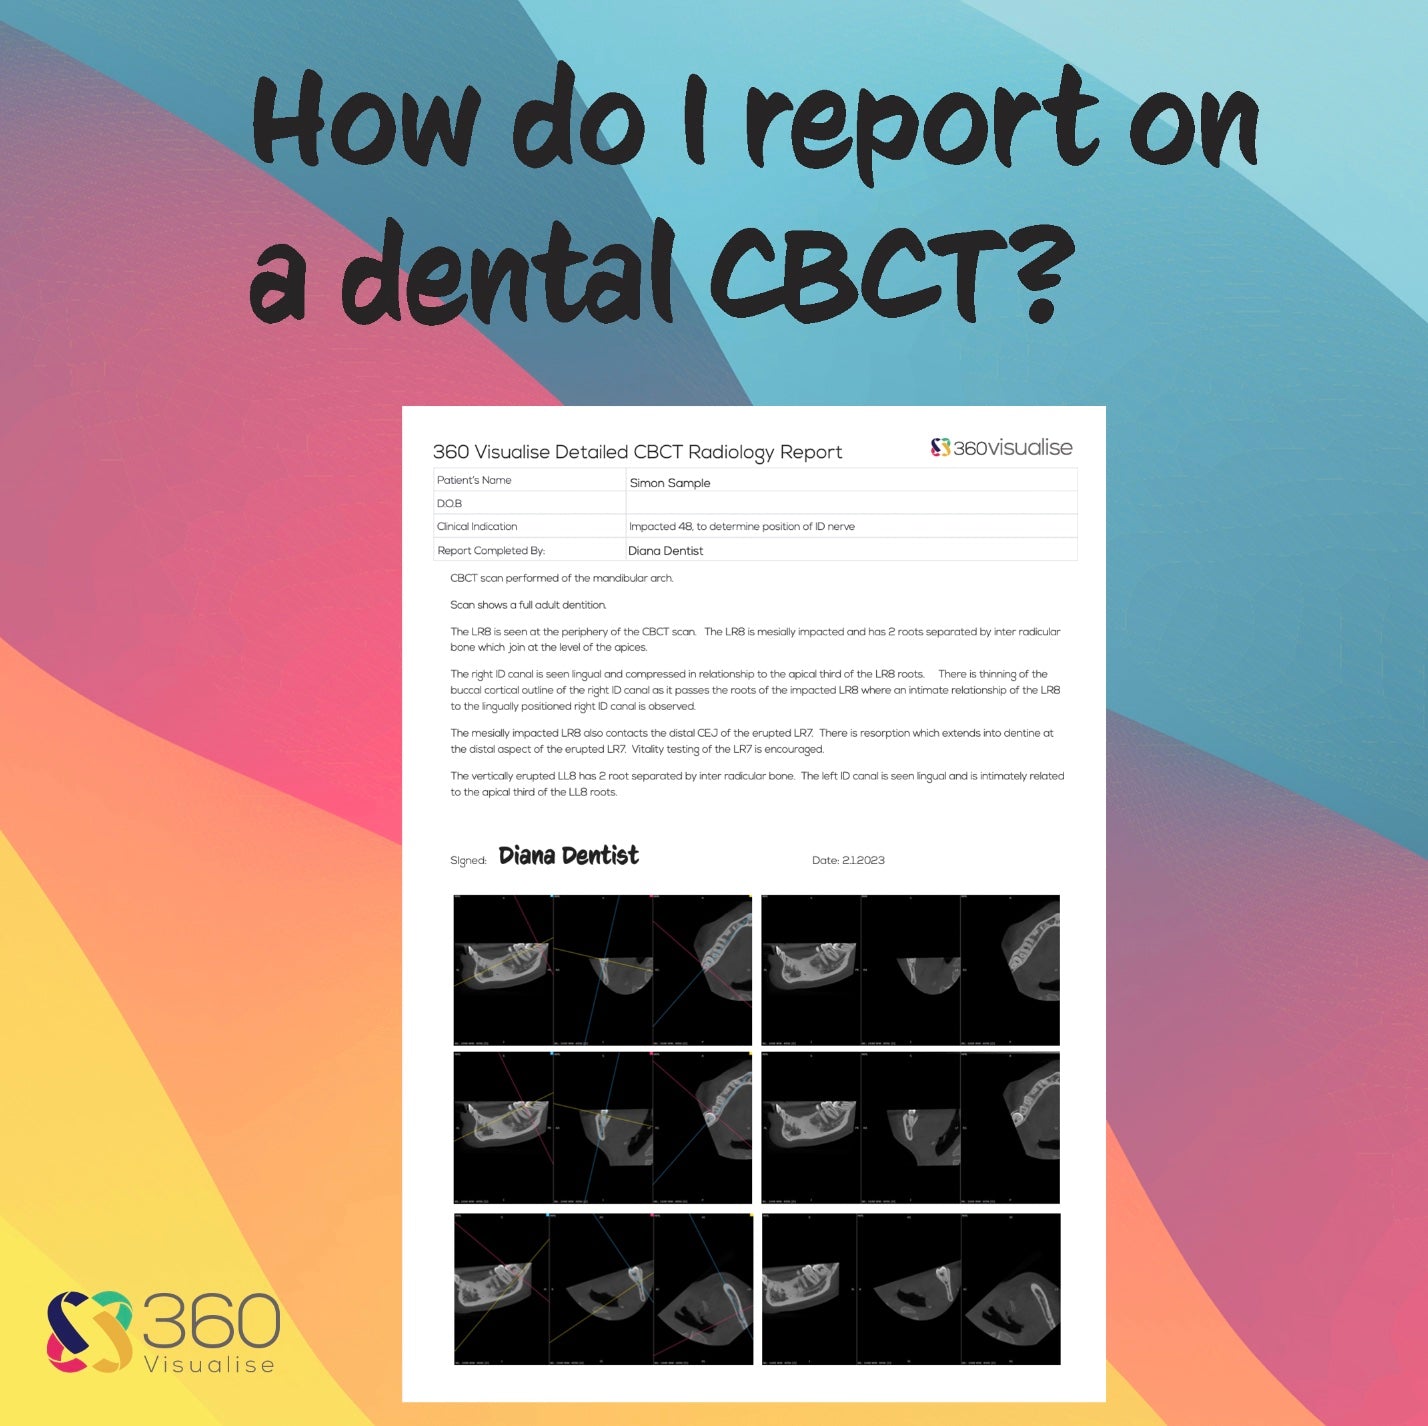 How report on dental CBCT.